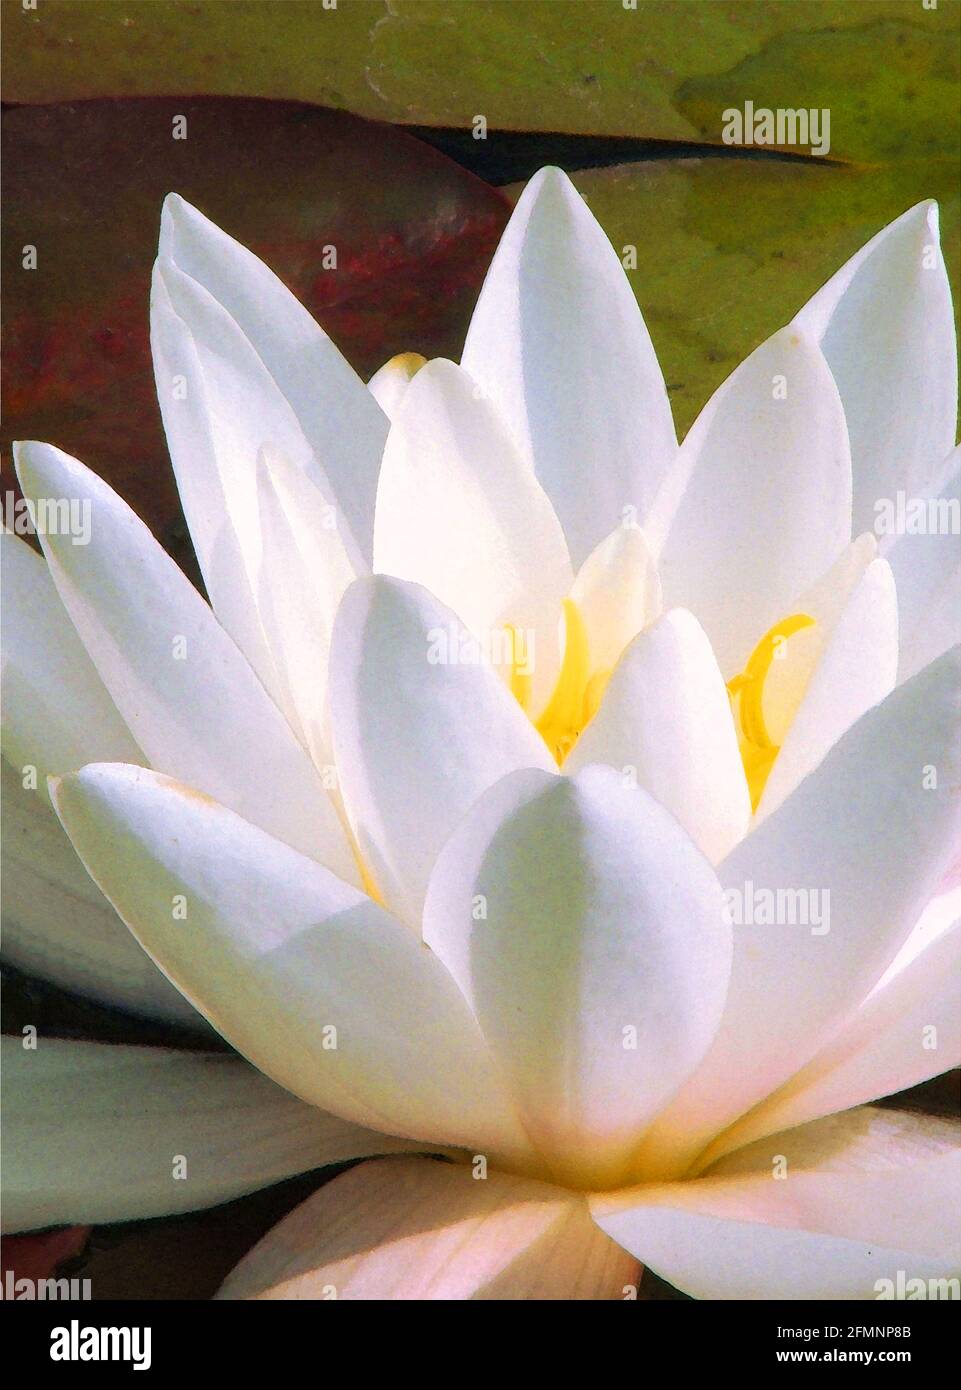 White Water-Lily (Nymphaea alba) One of Forty-two Iconic Images of English Garden Flowers, Wildflowers and Rural Landscapes. Stock Photo